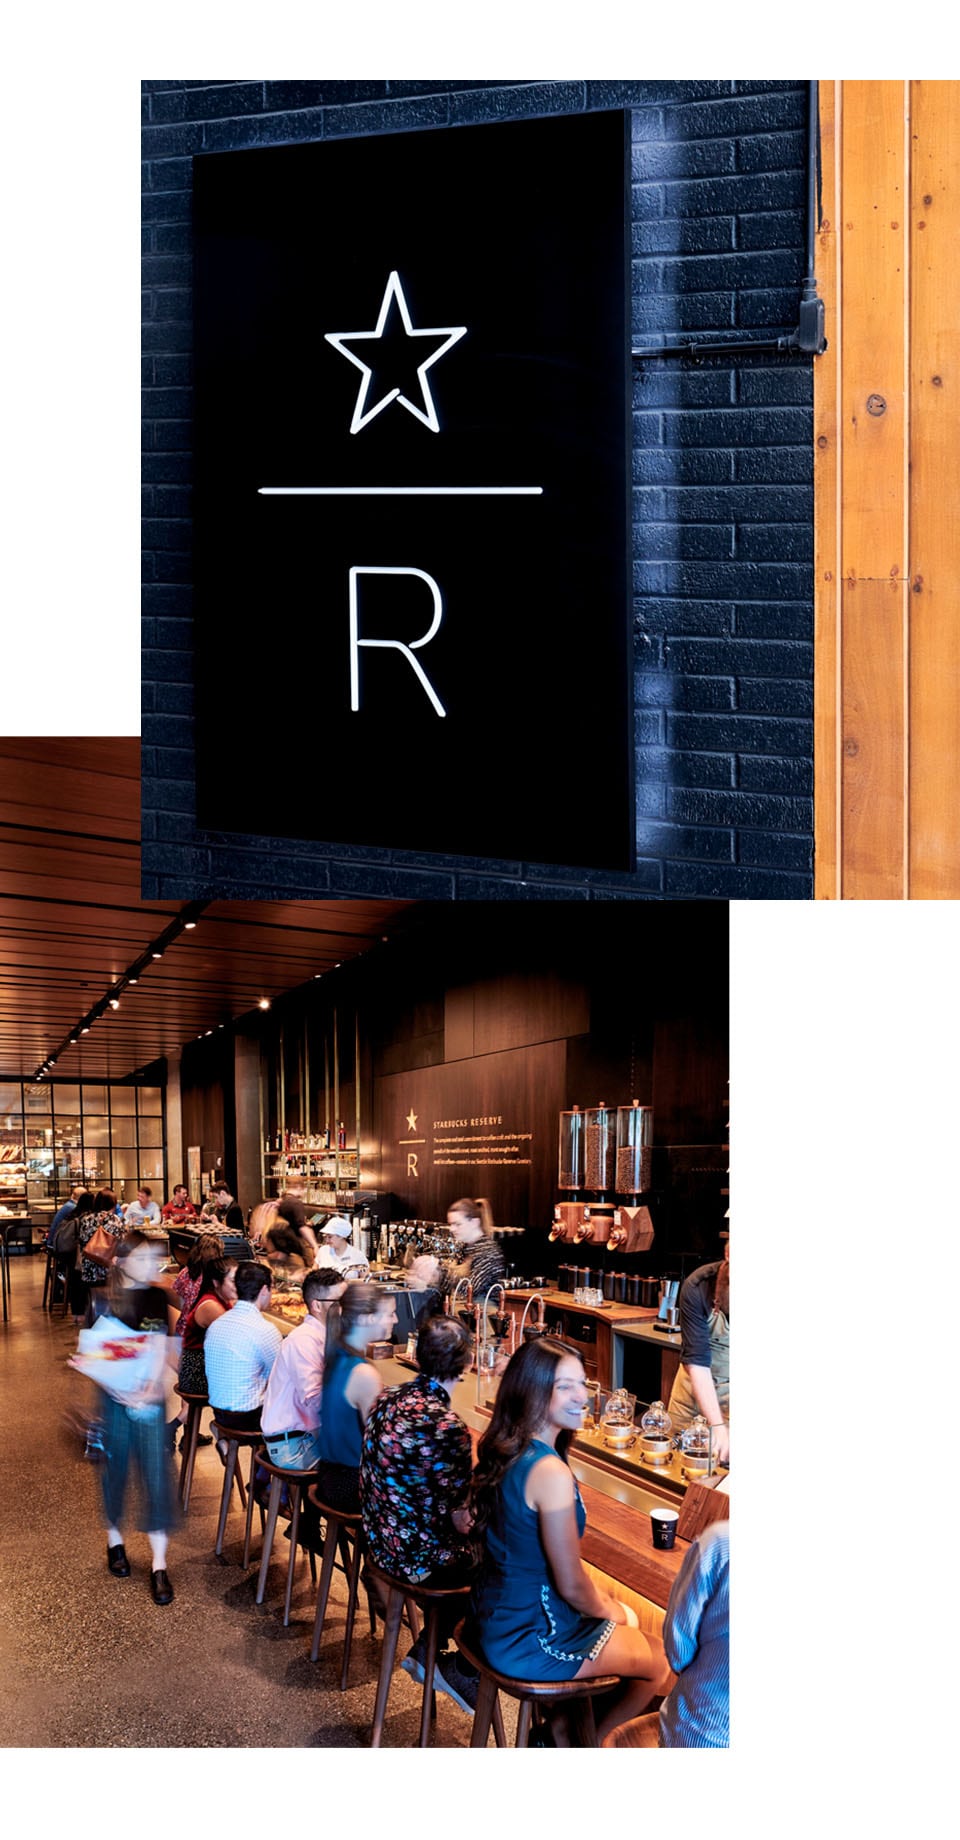 Collage with closeup image of Starbucks Reserve logo on a tiled wall and a dozen people sitting at a counter in an interior space